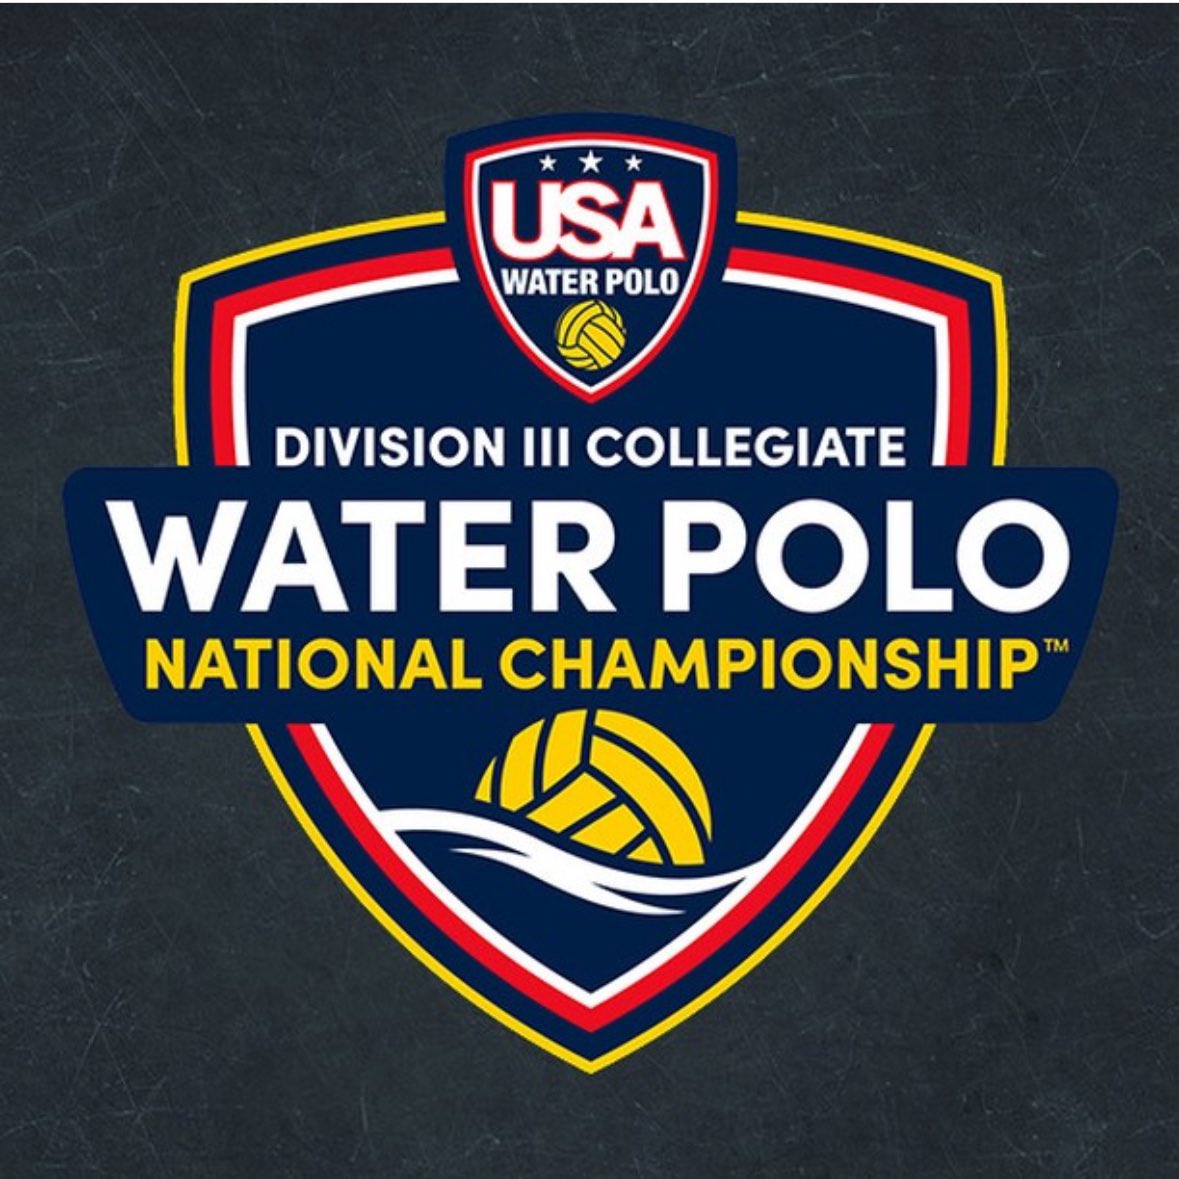 Three former @FlowerMoundHS teammates have made it to the final 4 in the @NCAA / @USAWP DIII National Championship this weekend! Natalie Stearns (‘22) @cmswaterpolo Alayna Ickert (‘23) @AugustanaPolo & McKenna Malone (‘22) @AustinCollegeWP Congrats ladies #NextLevelJags